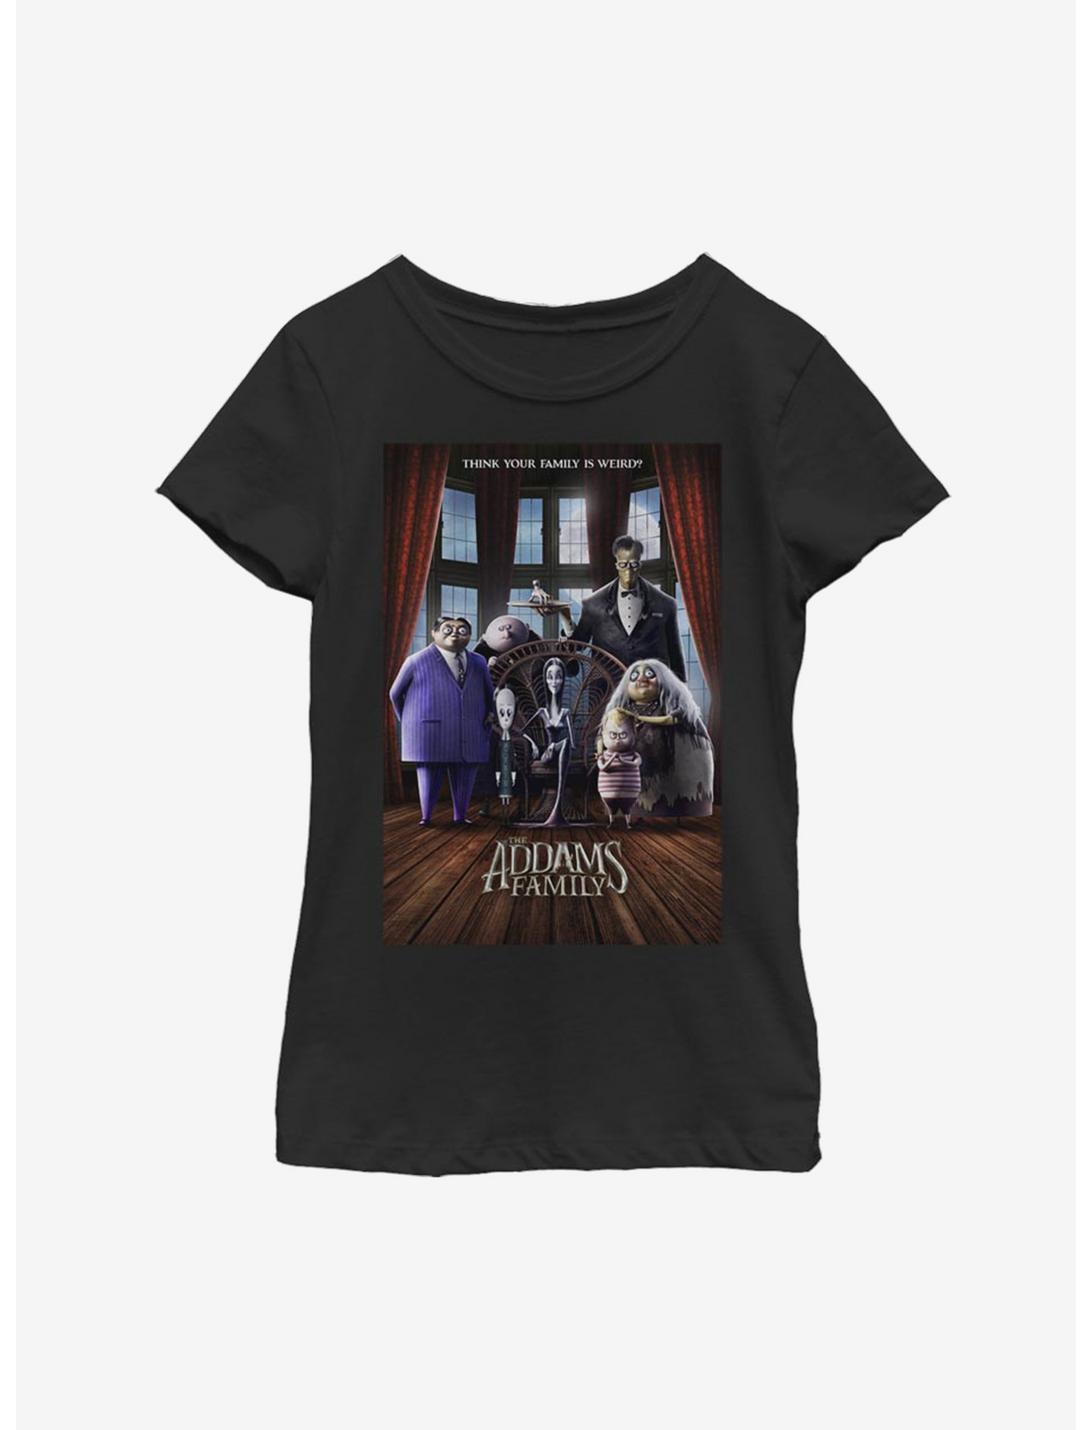 The Addams Family Theatrical Poster Youth Girls T-Shirt, BLACK, hi-res